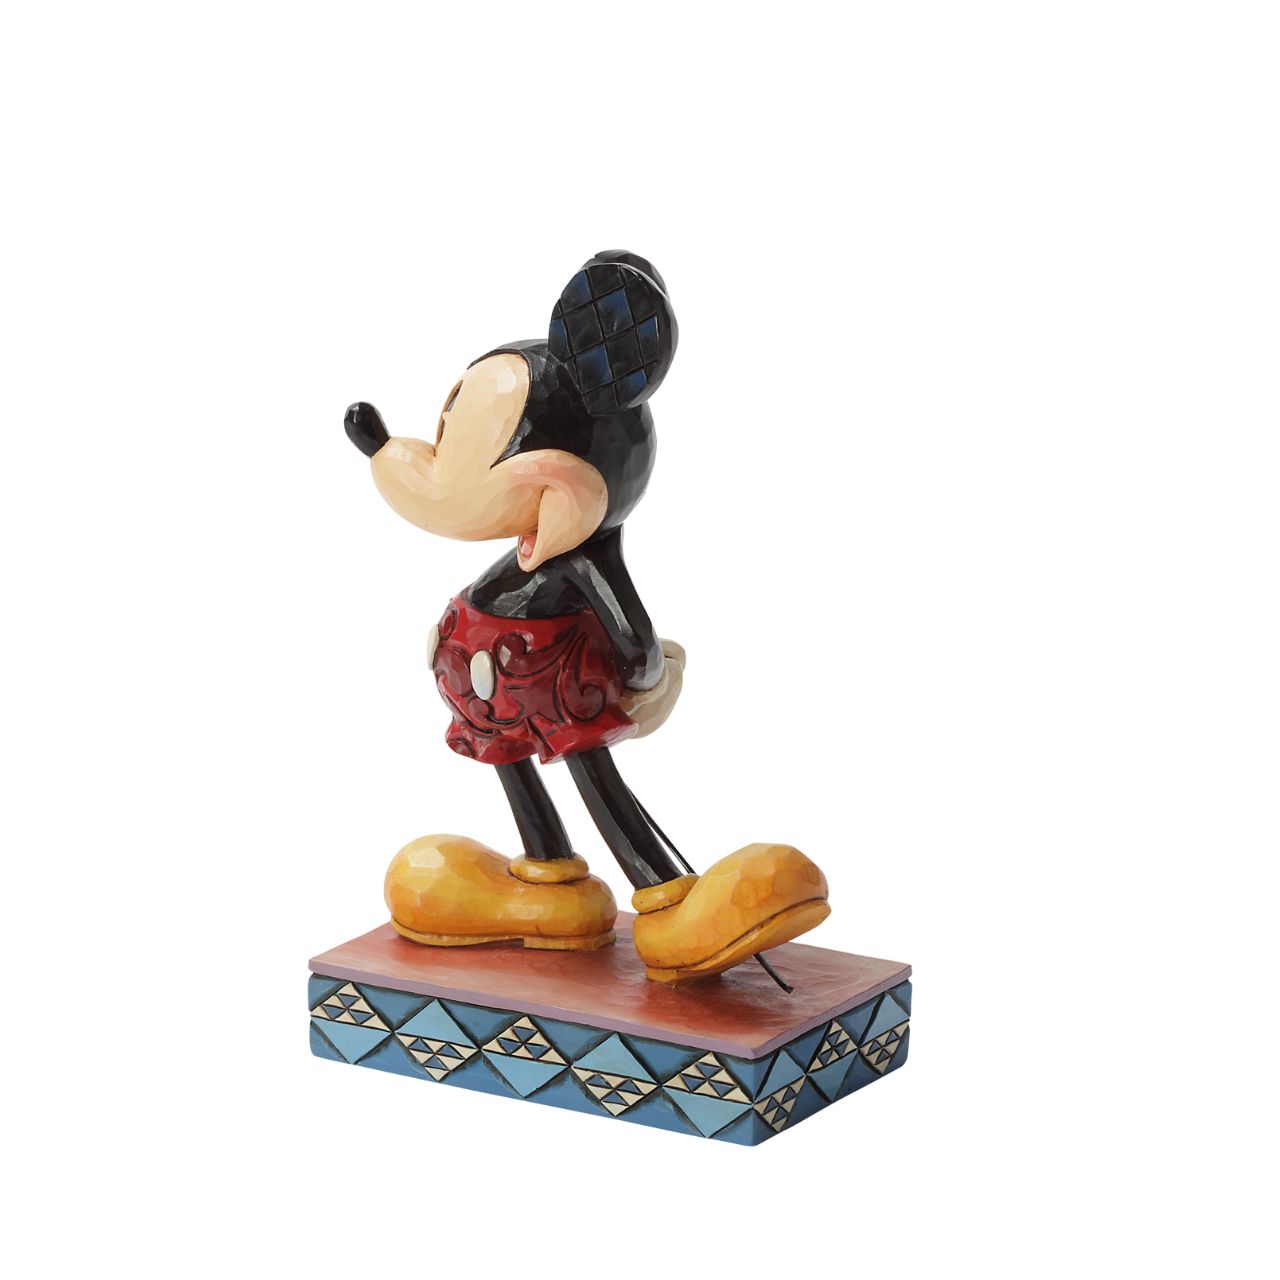 Disney Showcase The Original - Mickey Mouse Personality Pose  It all started with a Mouse...this figurine features Classic Mickey in his well known classic pose. Designed by award winning artist and sculptor, Jim Shore for the Disney Traditions brand. Made from cast stone.